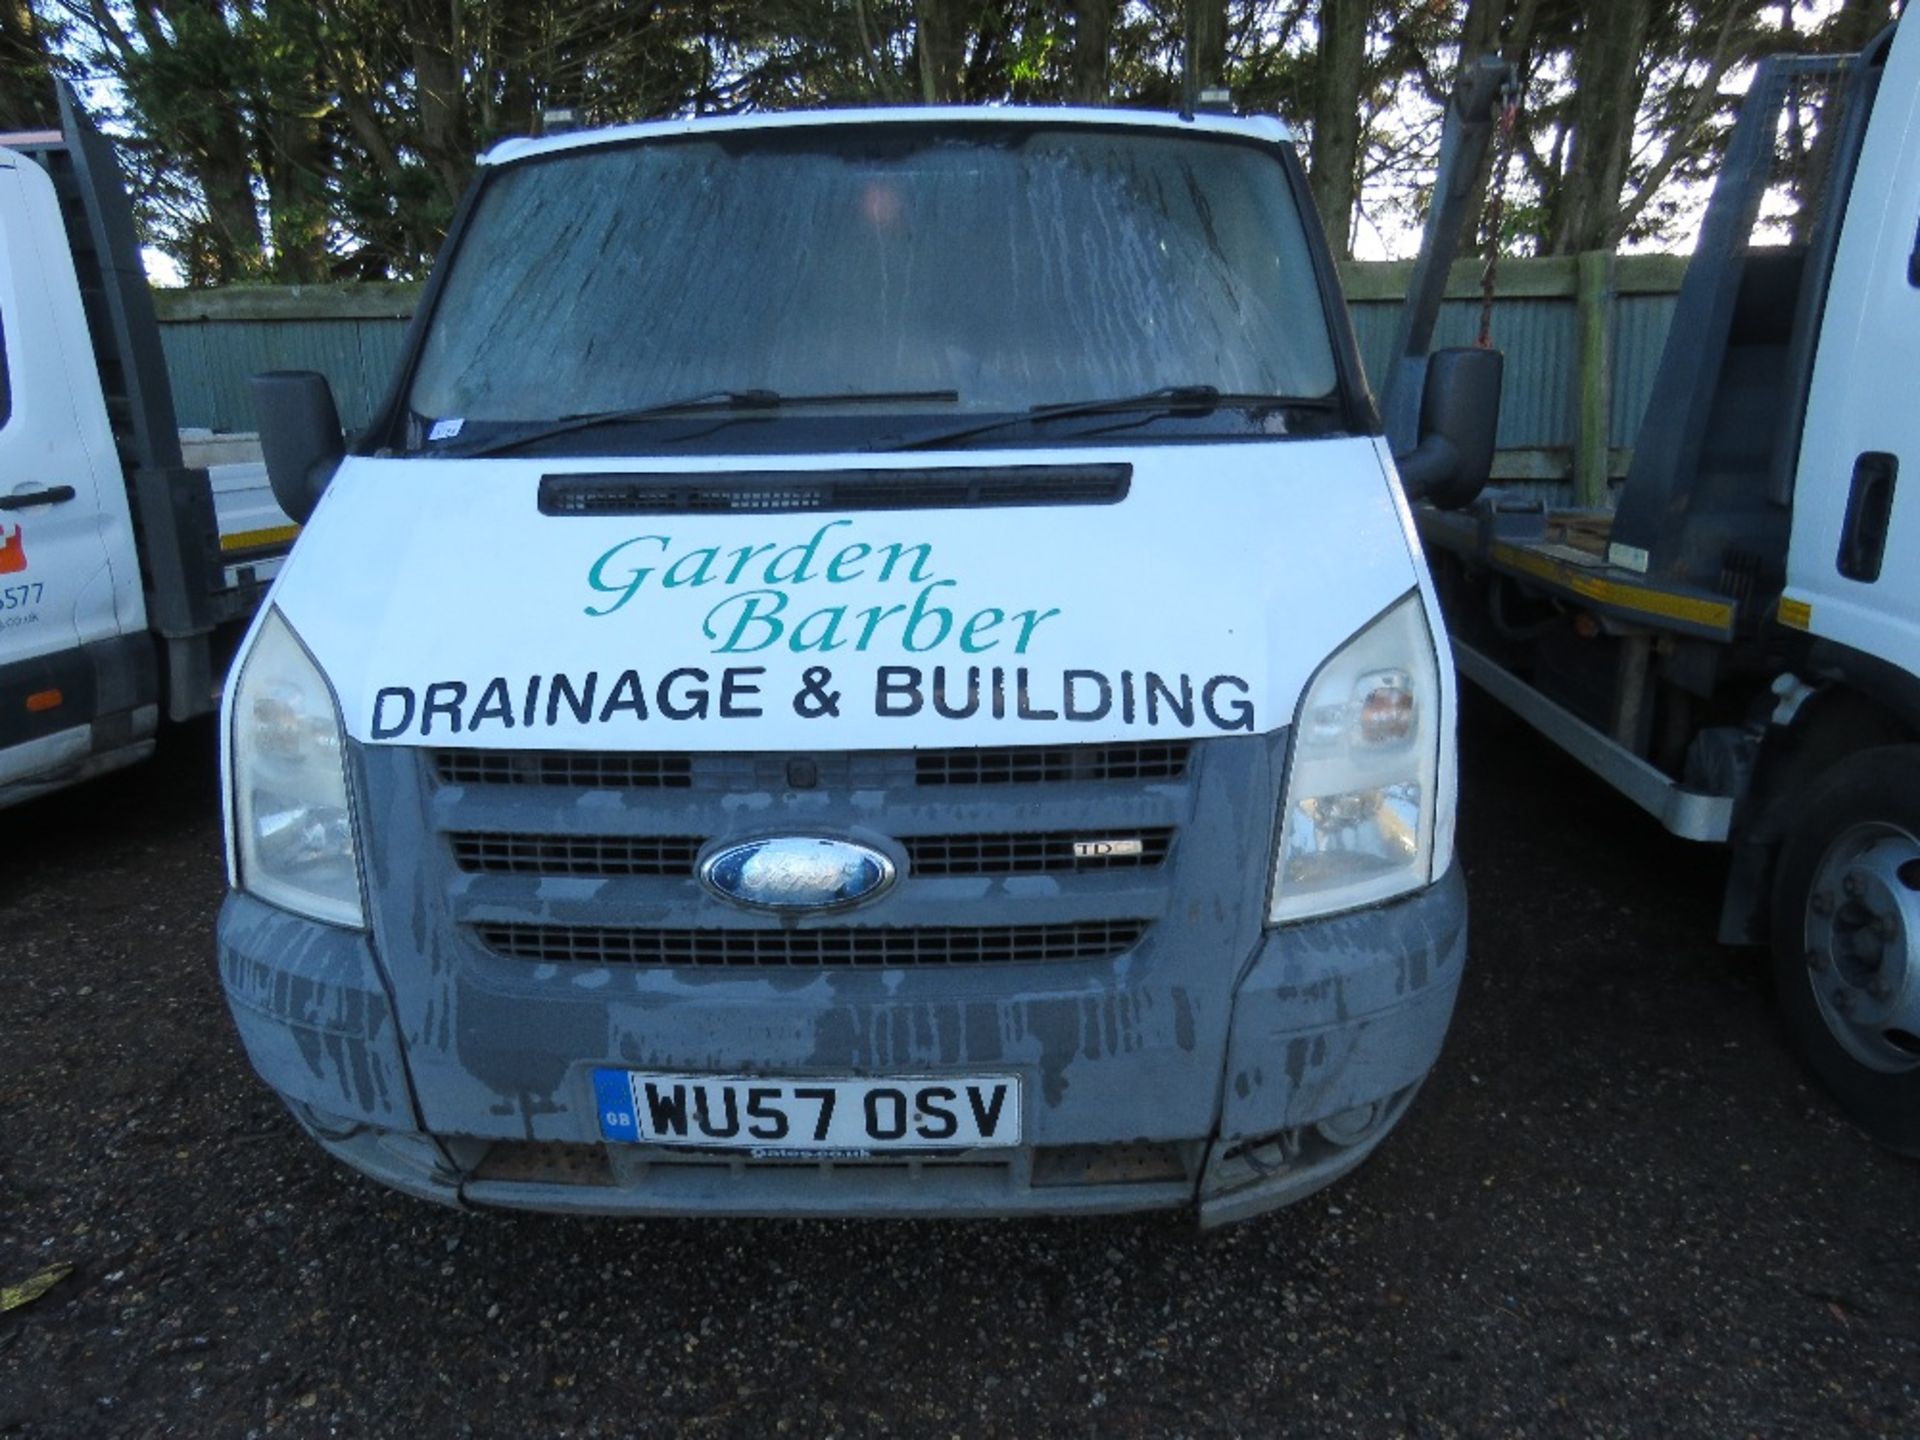 FORD TRANSIT 115T350M TIPPER TRUCK REG: WU57 OSV. 2402CC DIESEL ENGINE. WITH V5, OWNED BY VENDOR SIN - Image 2 of 11